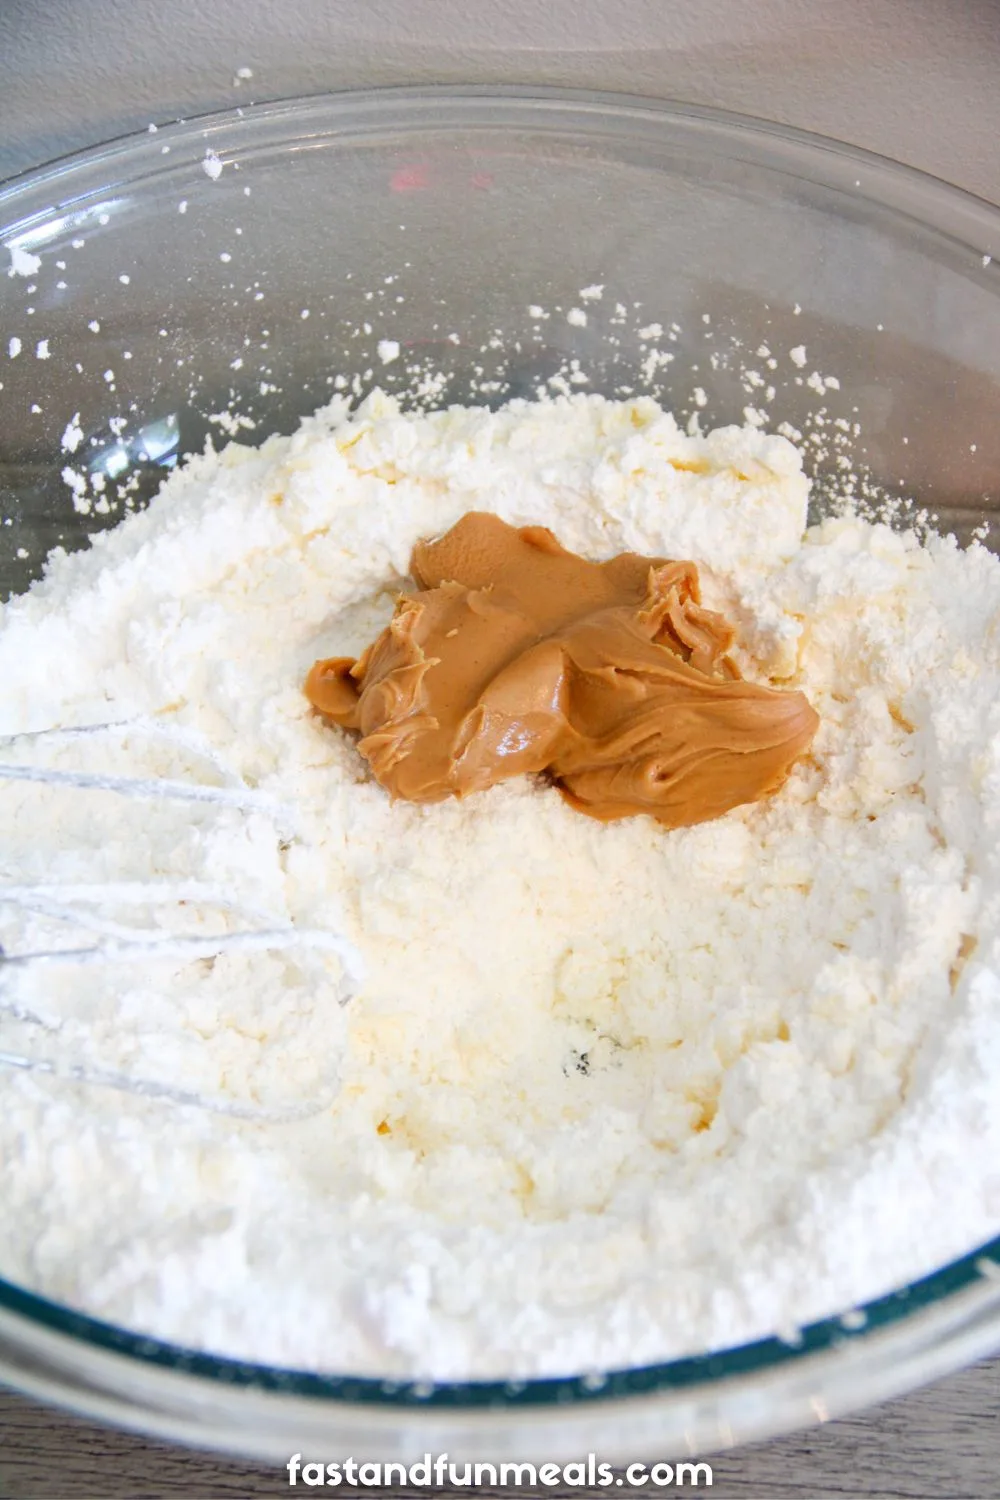 dry ingredients with peanut butter